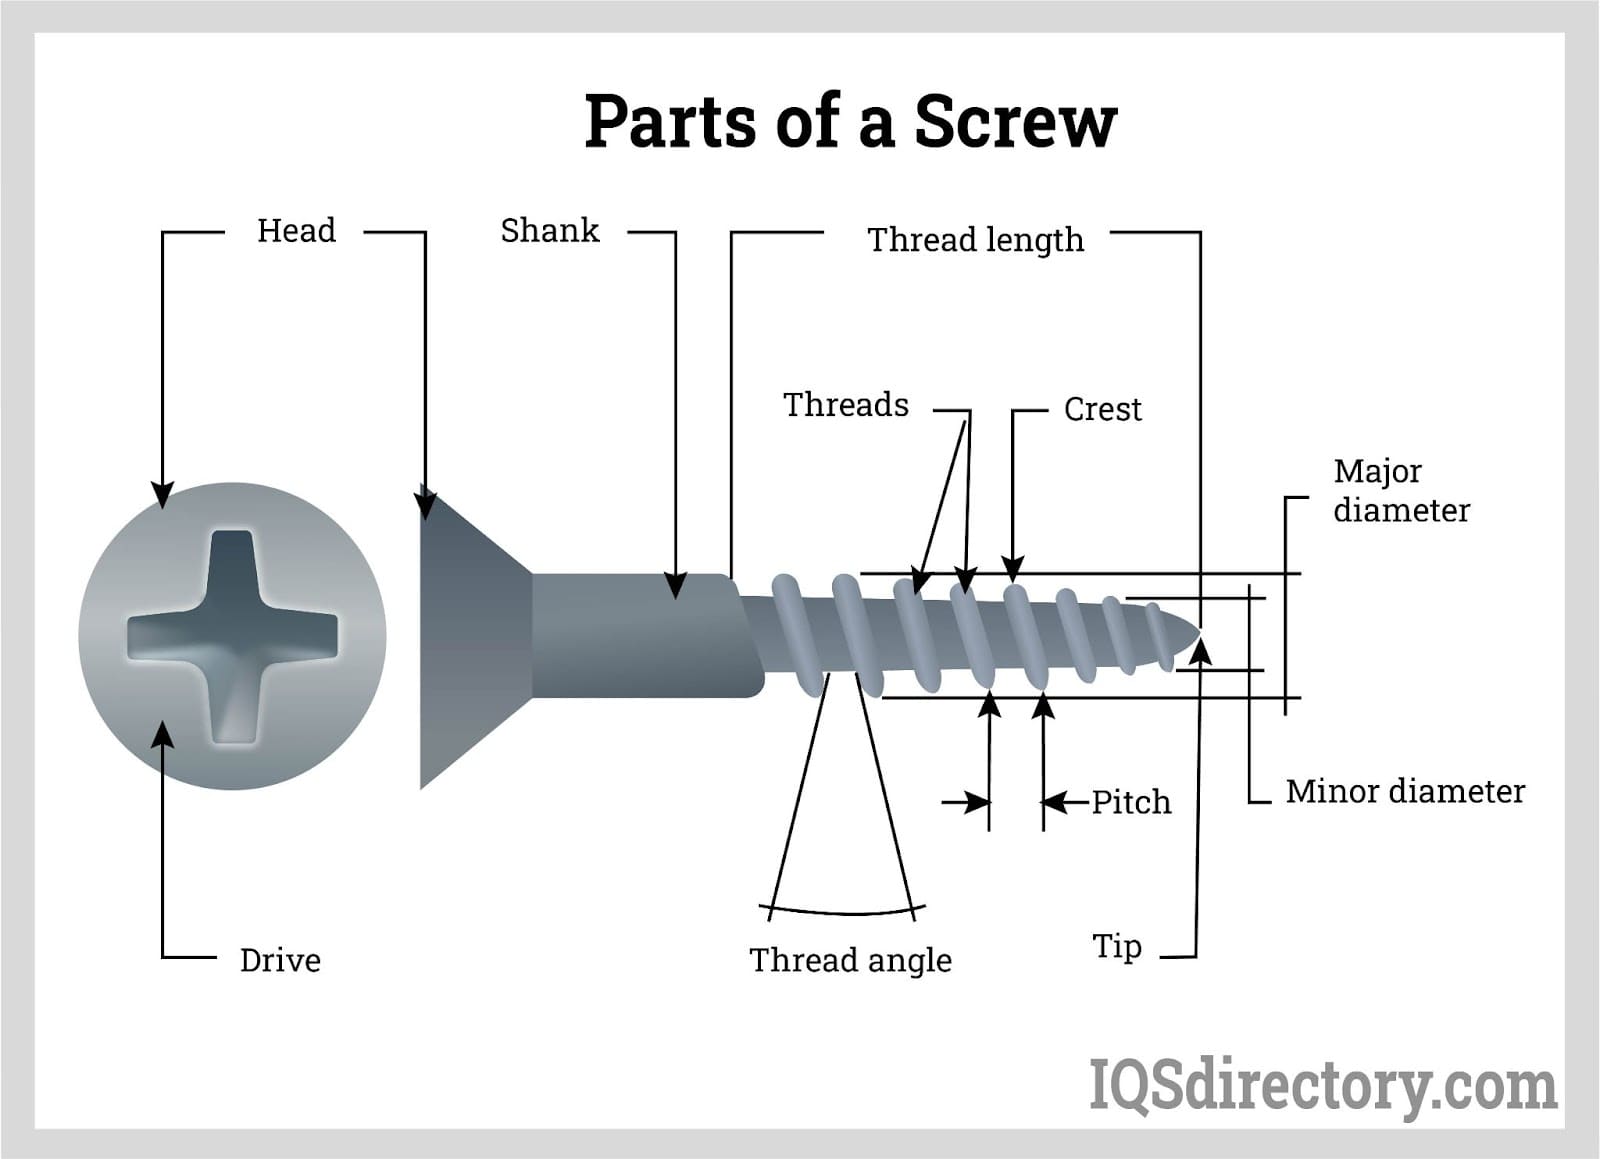 Parts of a Screw